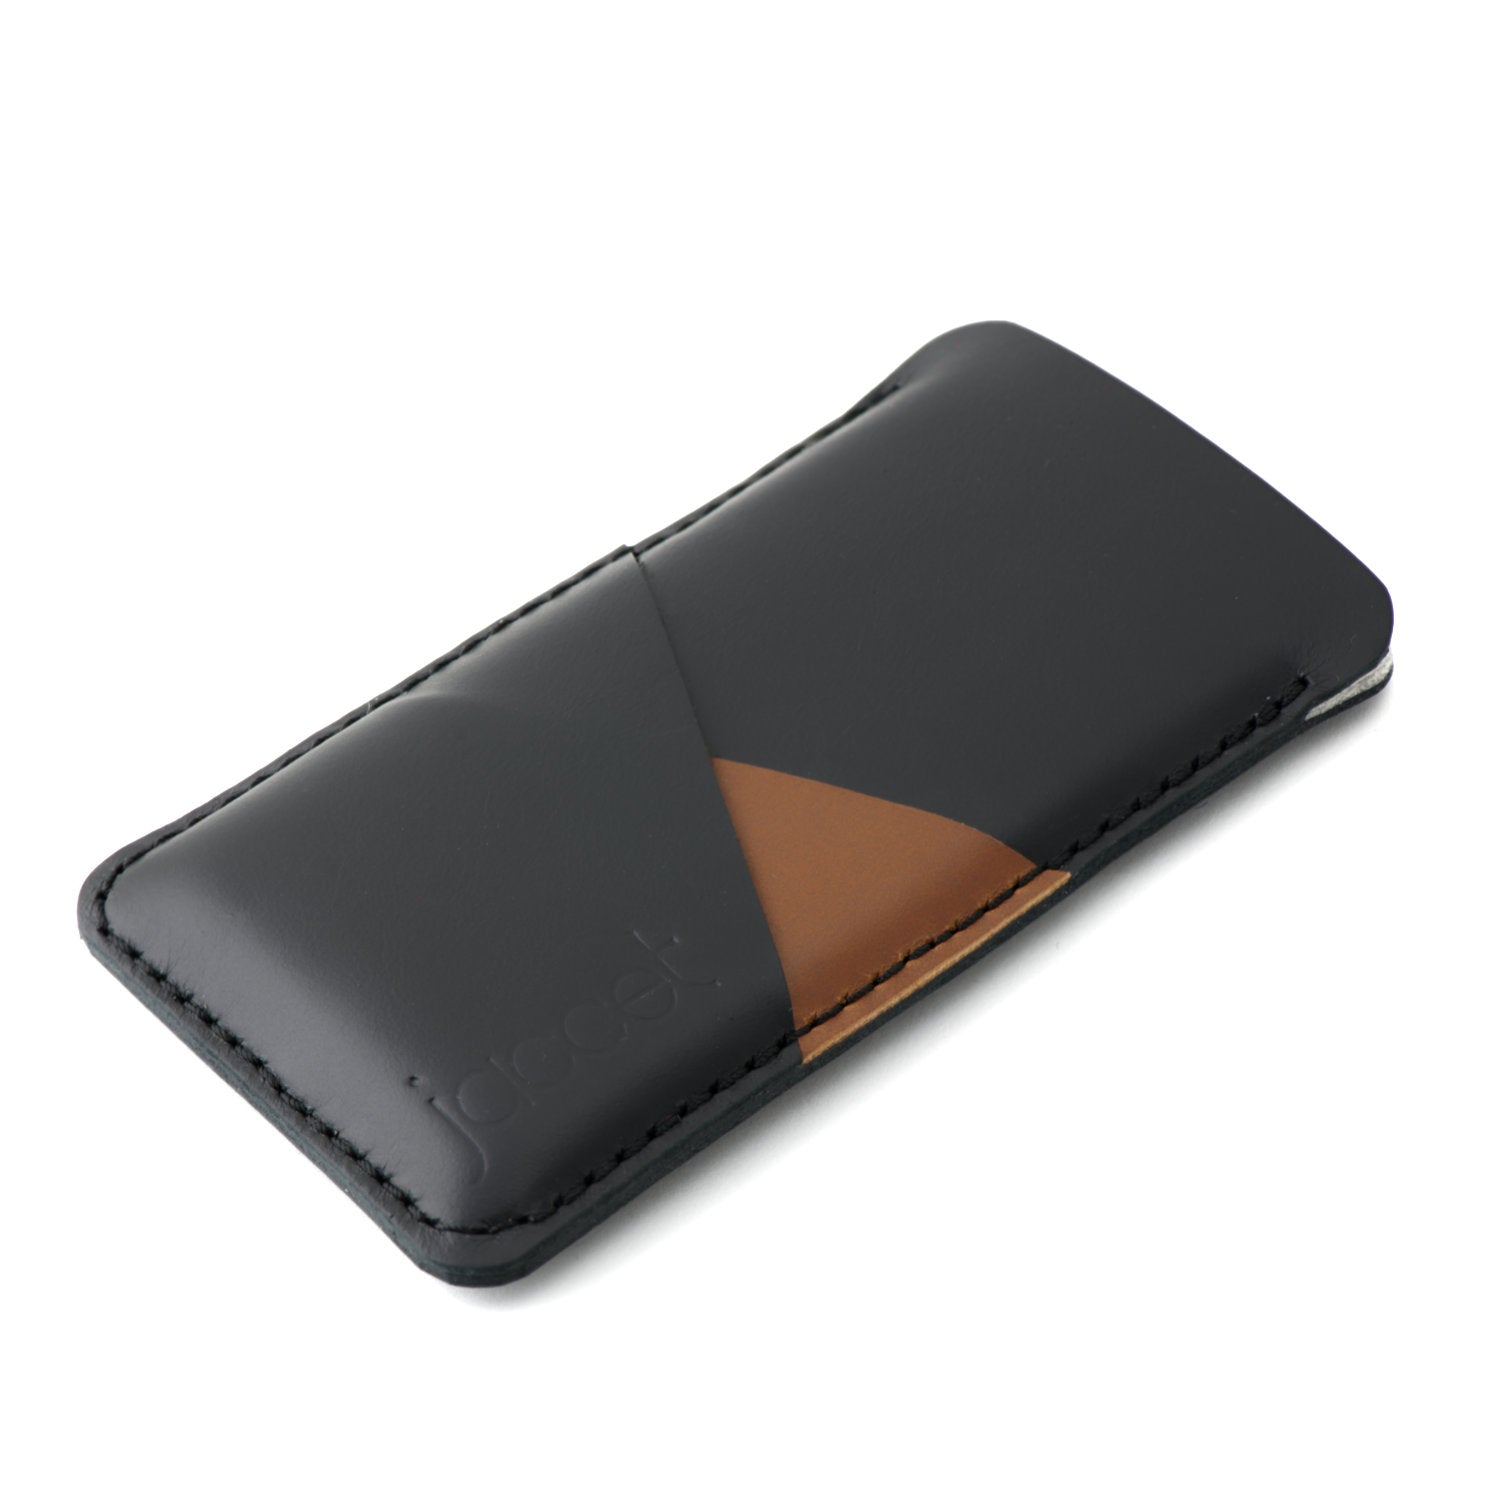 Full-grain leather OPPO sleeve - Black leather with two pockets voor cards